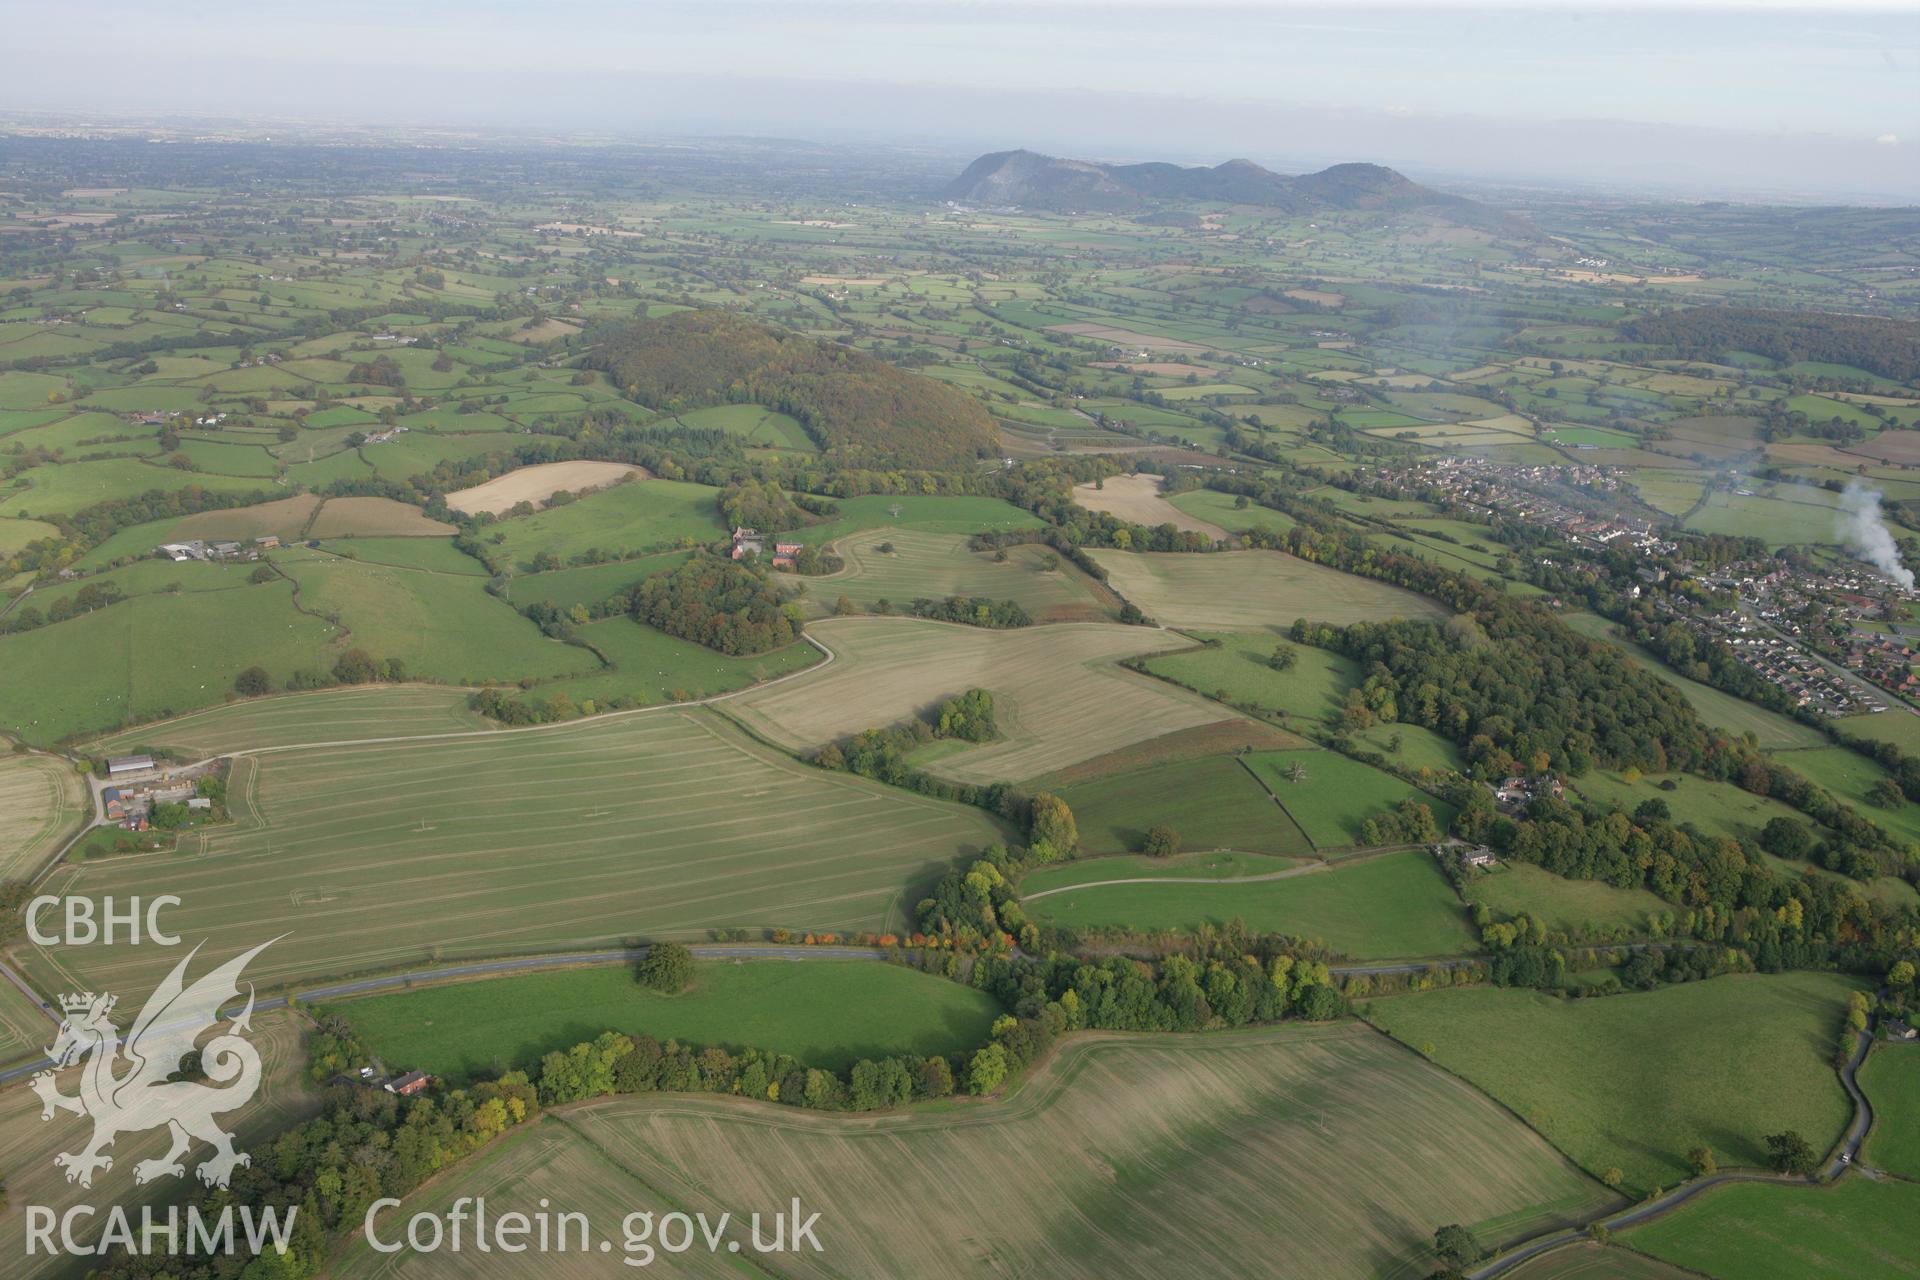 RCAHMW colour oblique aerial photograph of Gaer Fawr, Guilsfield. A landscape view from the west. Taken on 13 October 2009 by Toby Driver